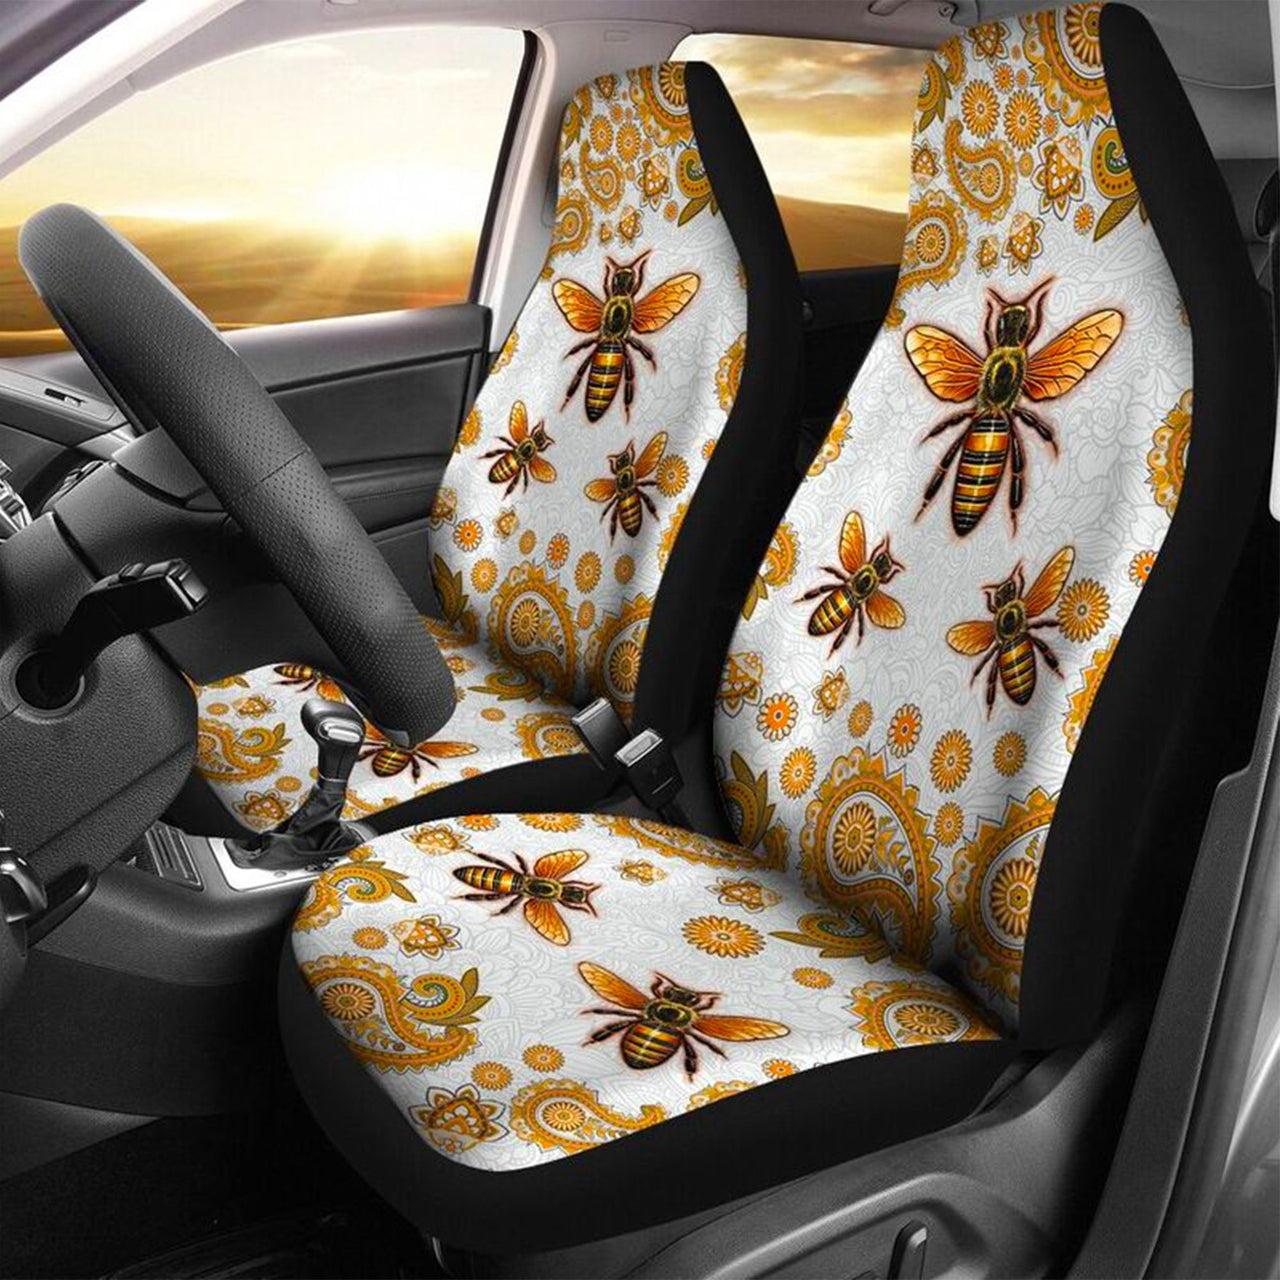 Custom Car Seat Cover Bee Patterns Seat Covers for Cars